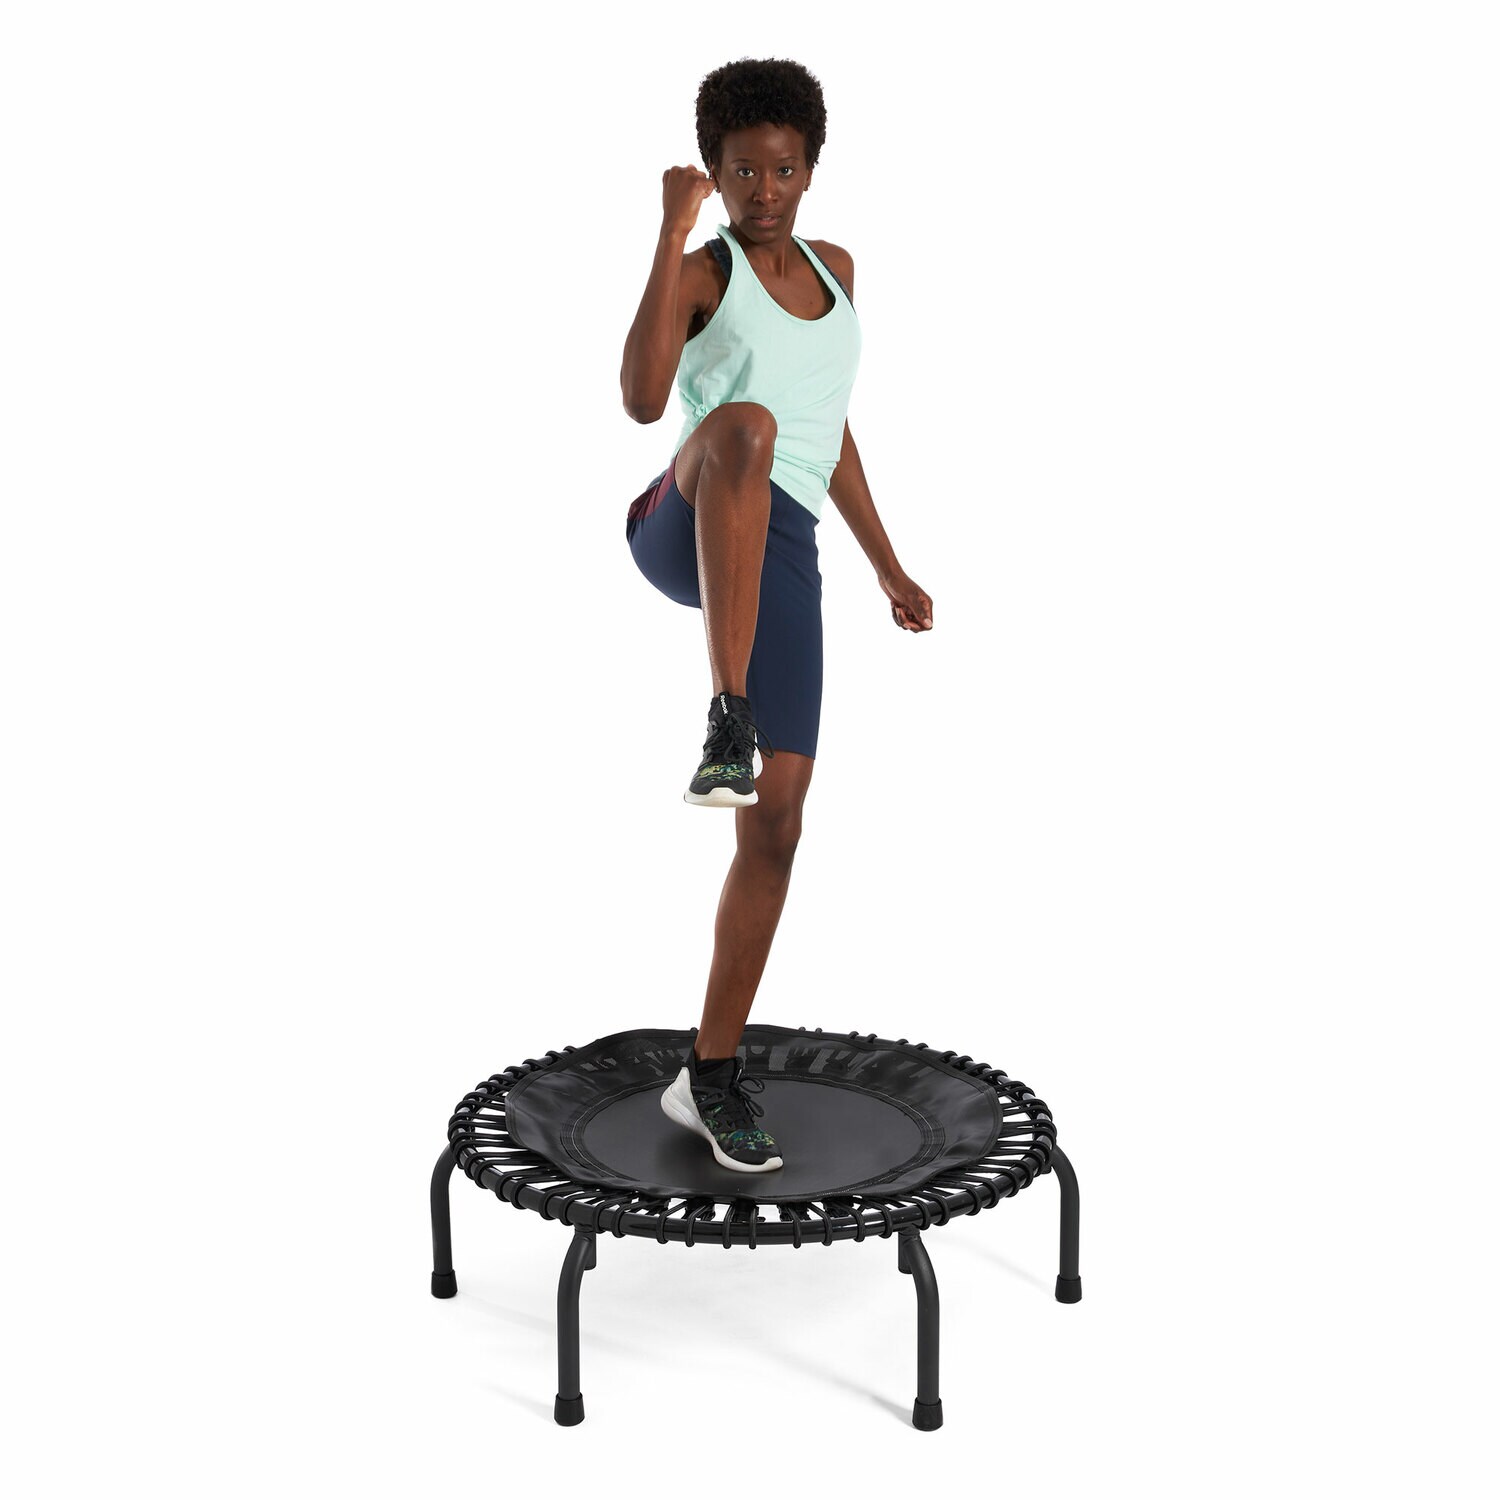 JumpSport 220 in Home Cardio Fitness Rebounder - Mini Trampoline with  Handle Bar Accessory, Premium Bungees and Workout DVD